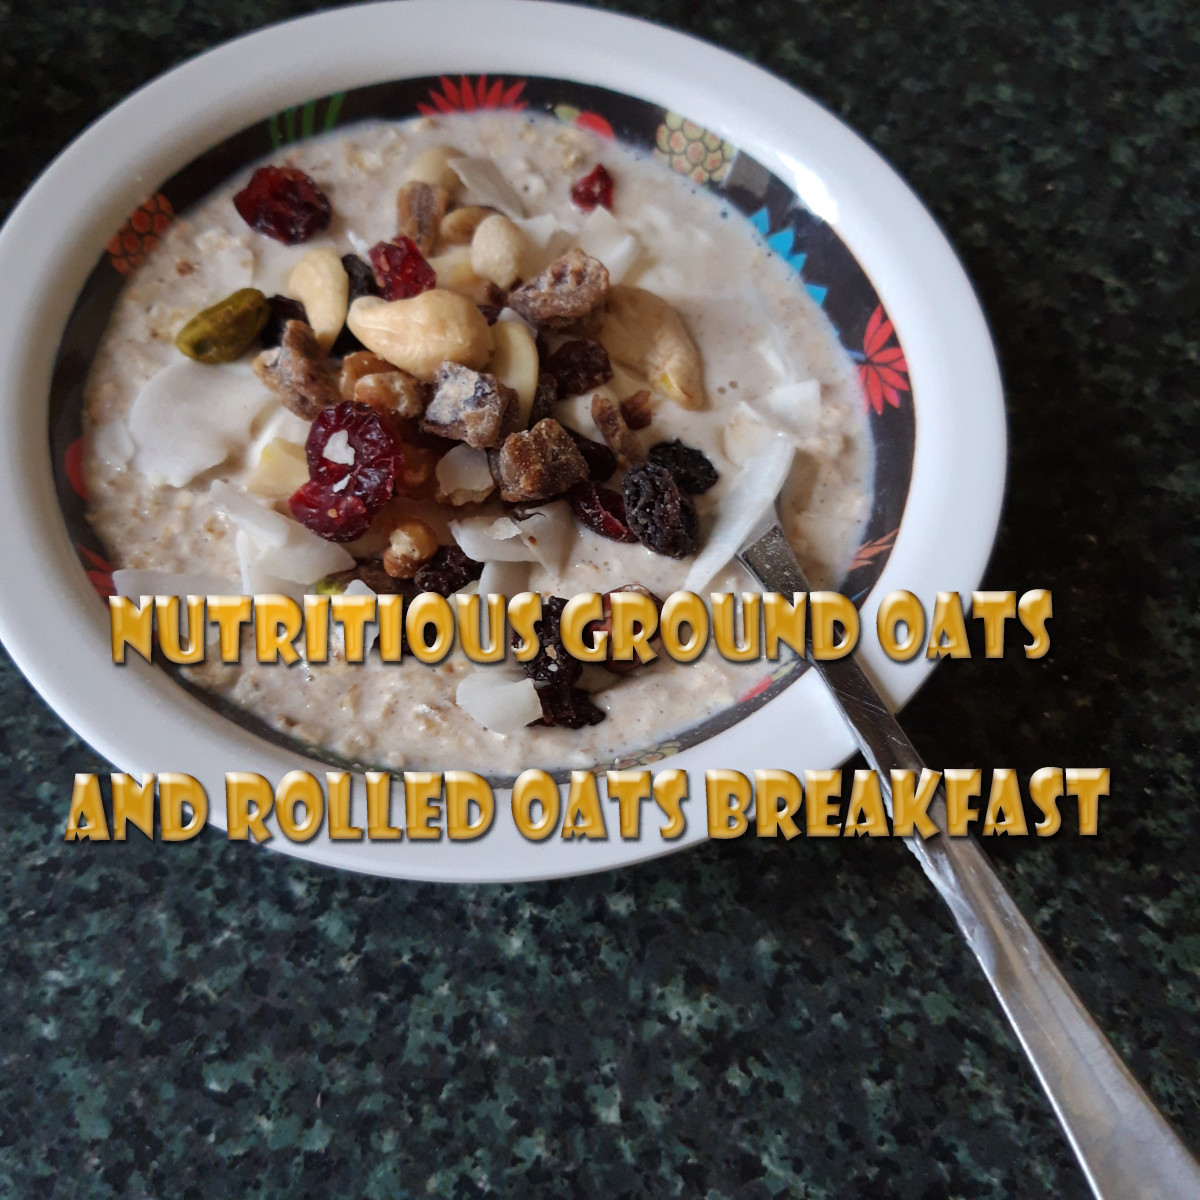 Dietary health experts recommend oats as a particularly healthy breakfast.